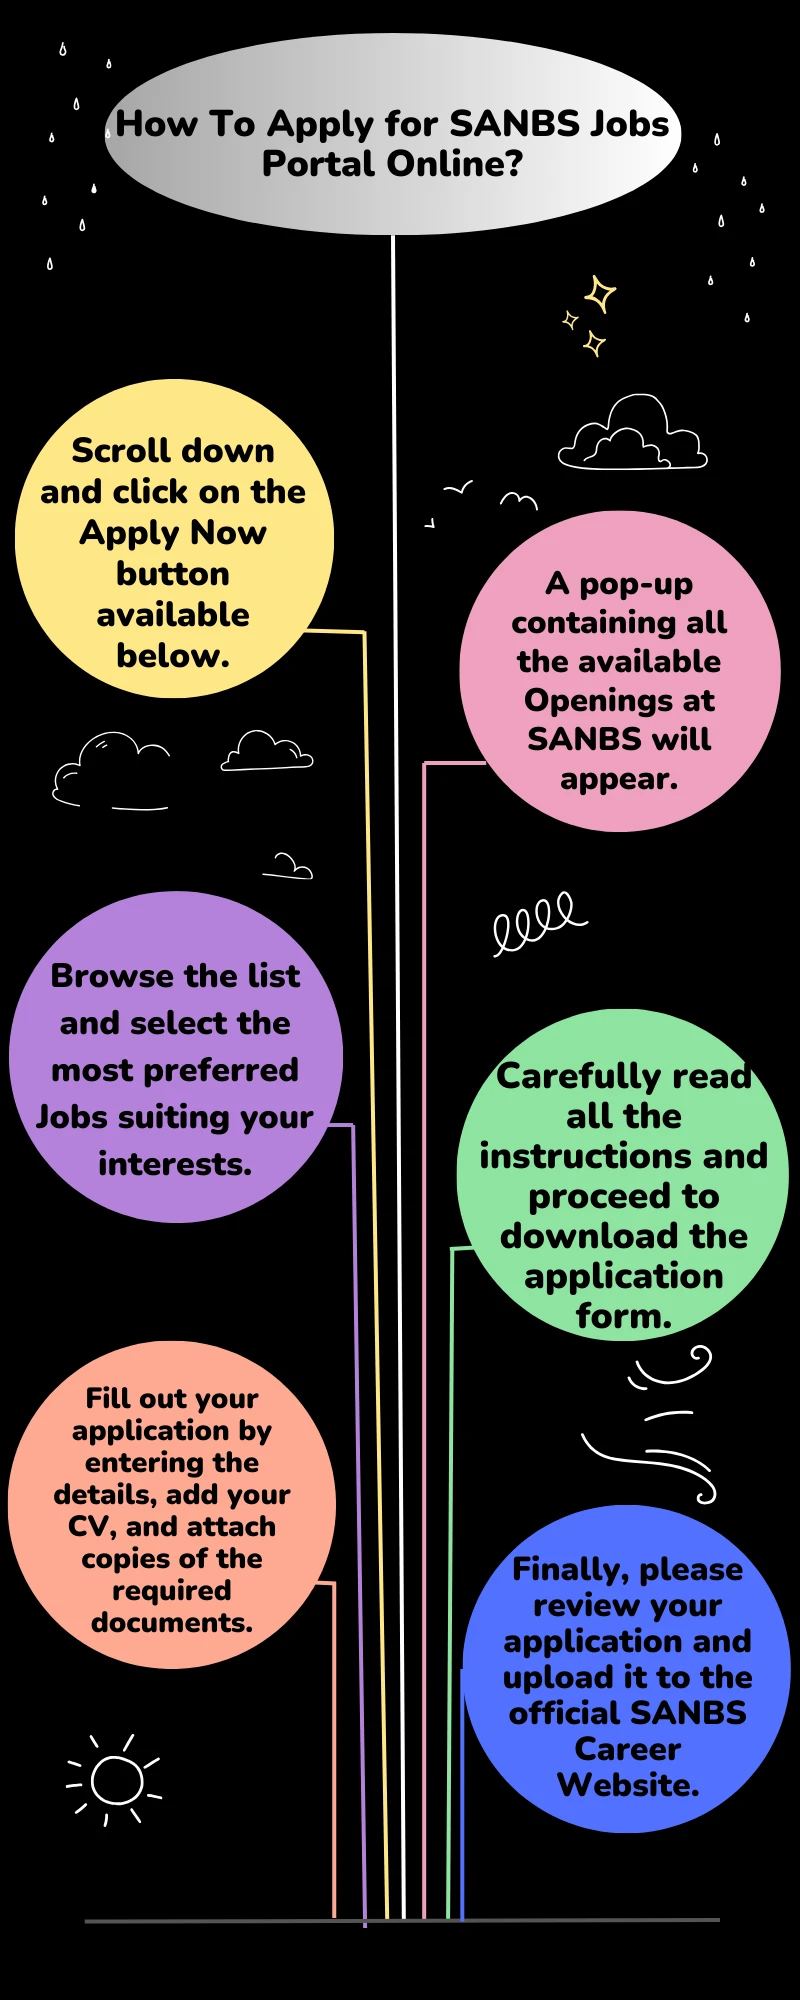 How To Apply for SANBS Jobs Portal Online?